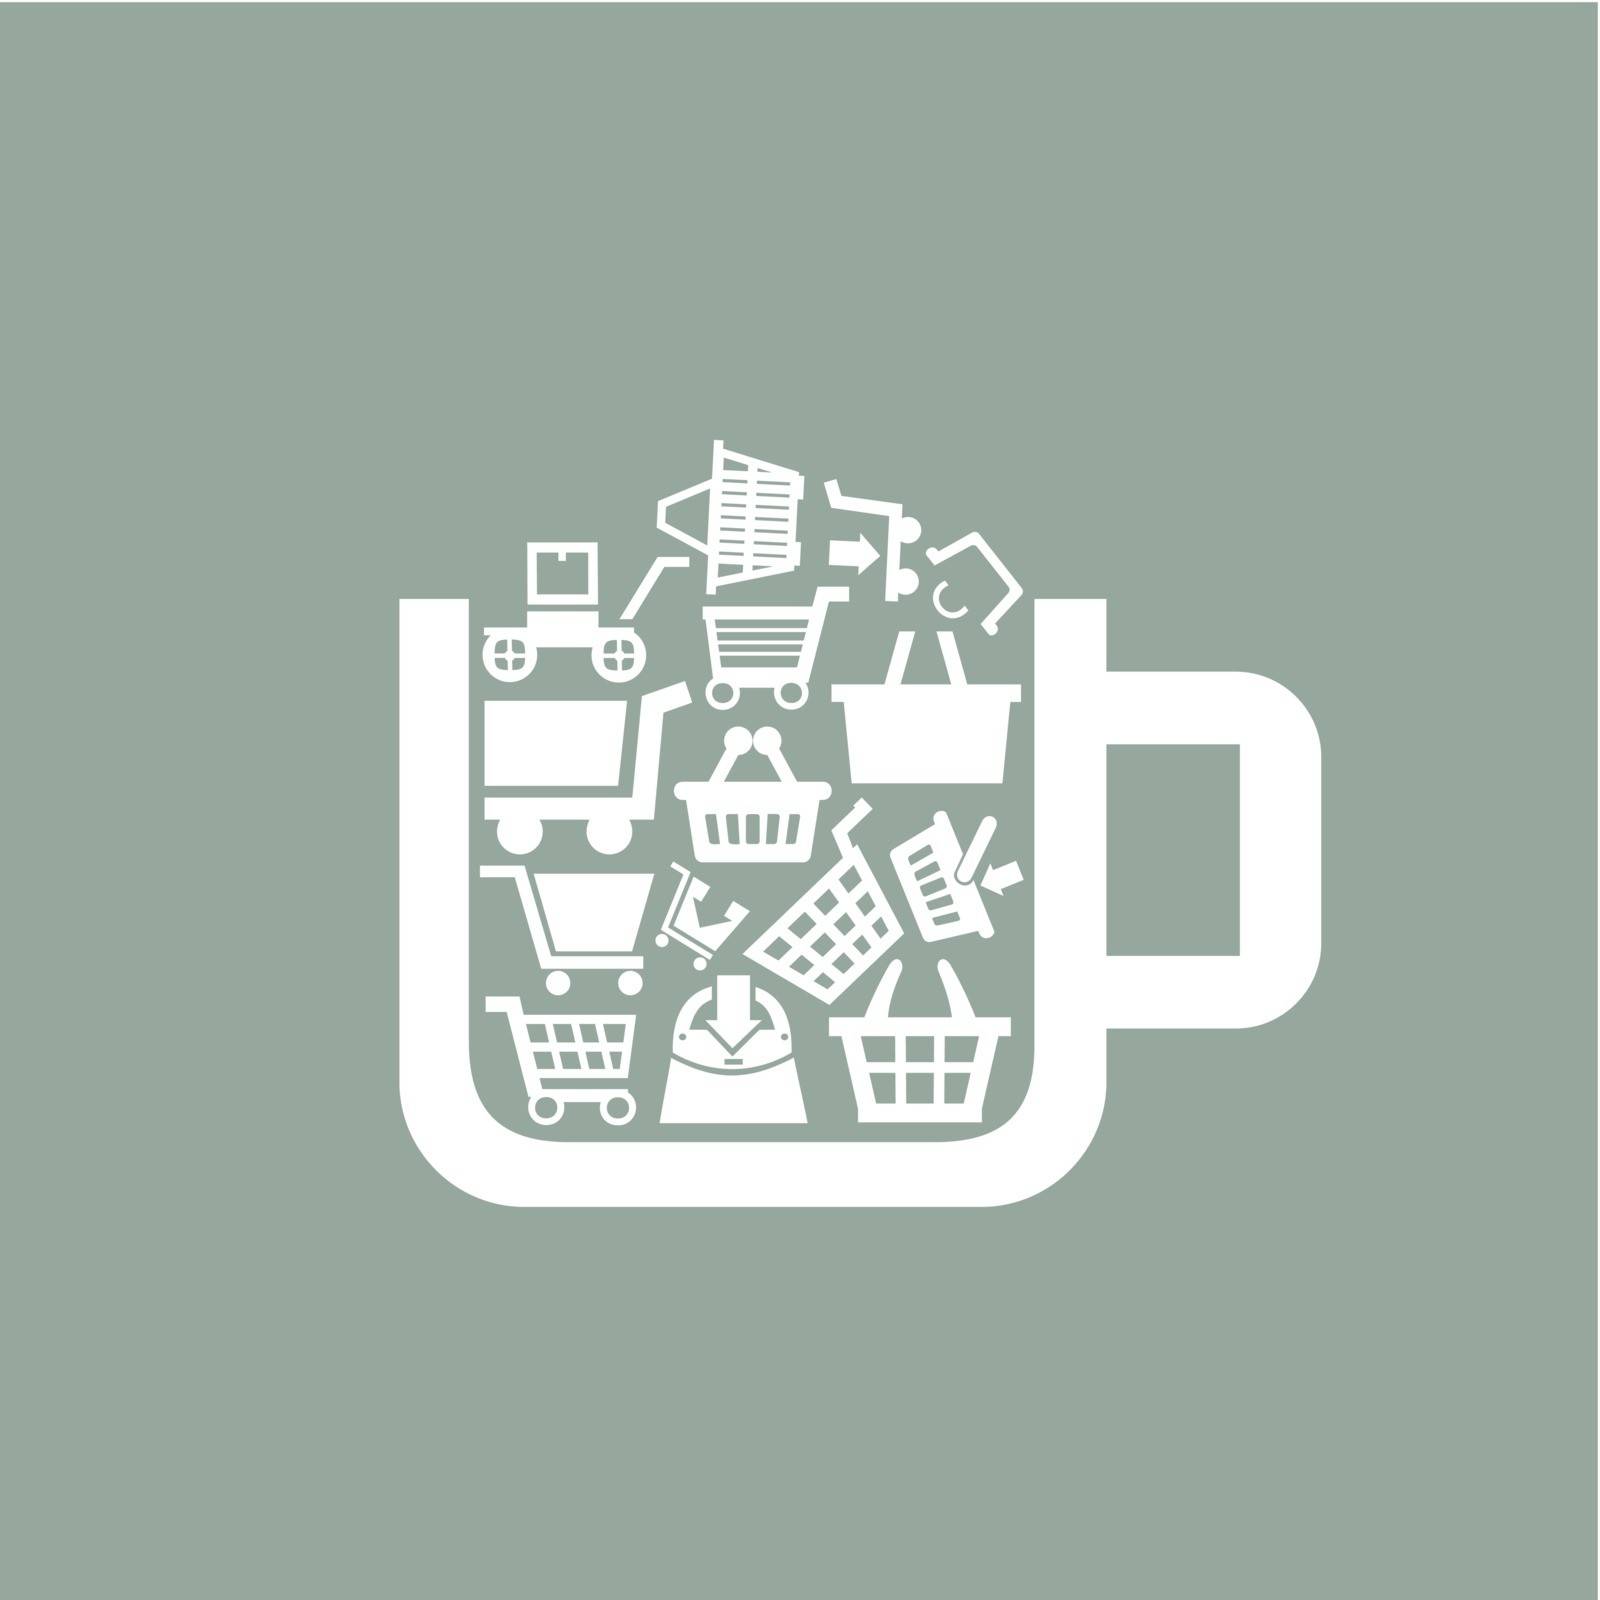 Cup the filled sale. A vector illustration